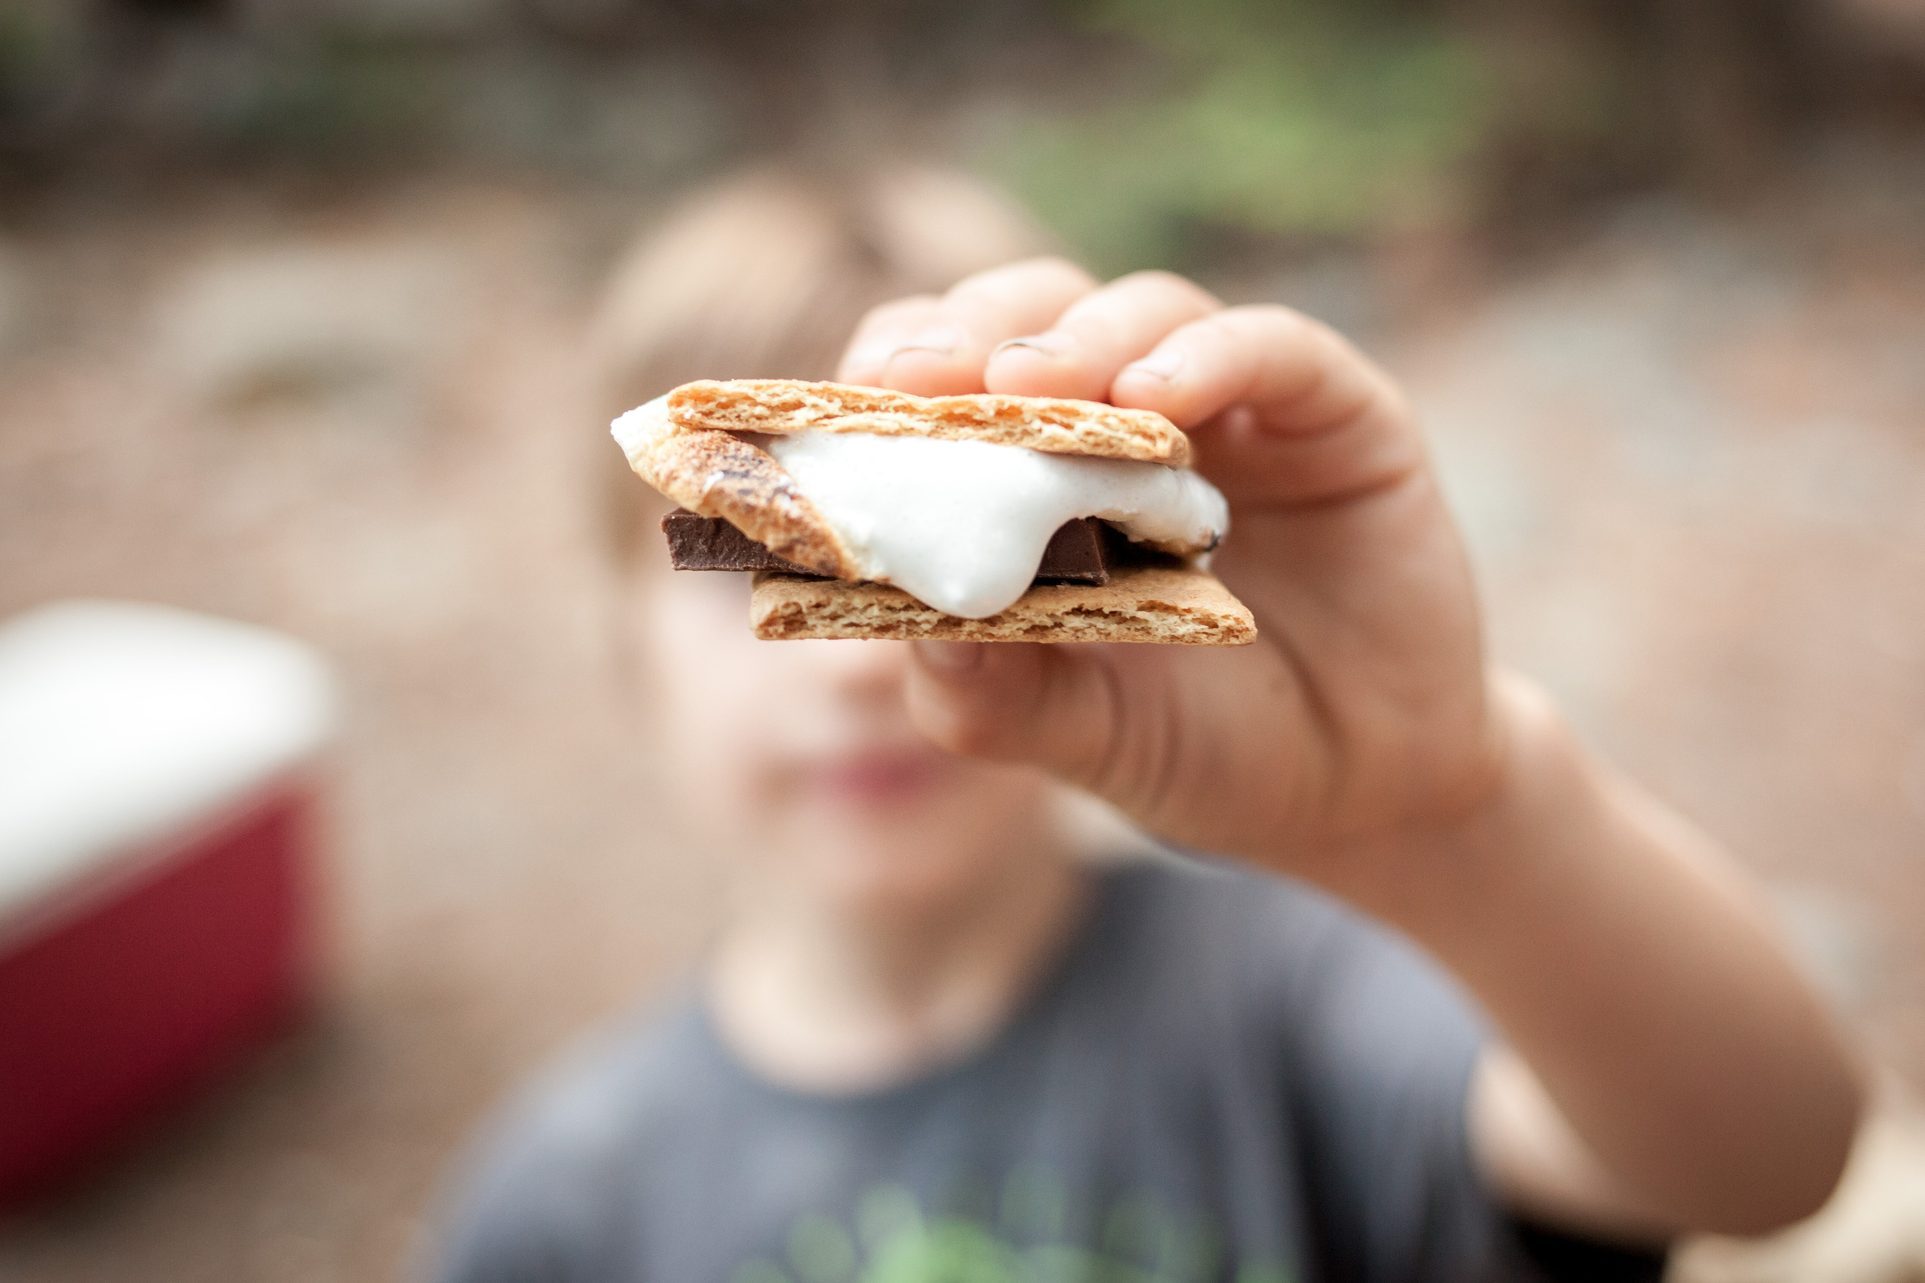 Boy holding a s'more